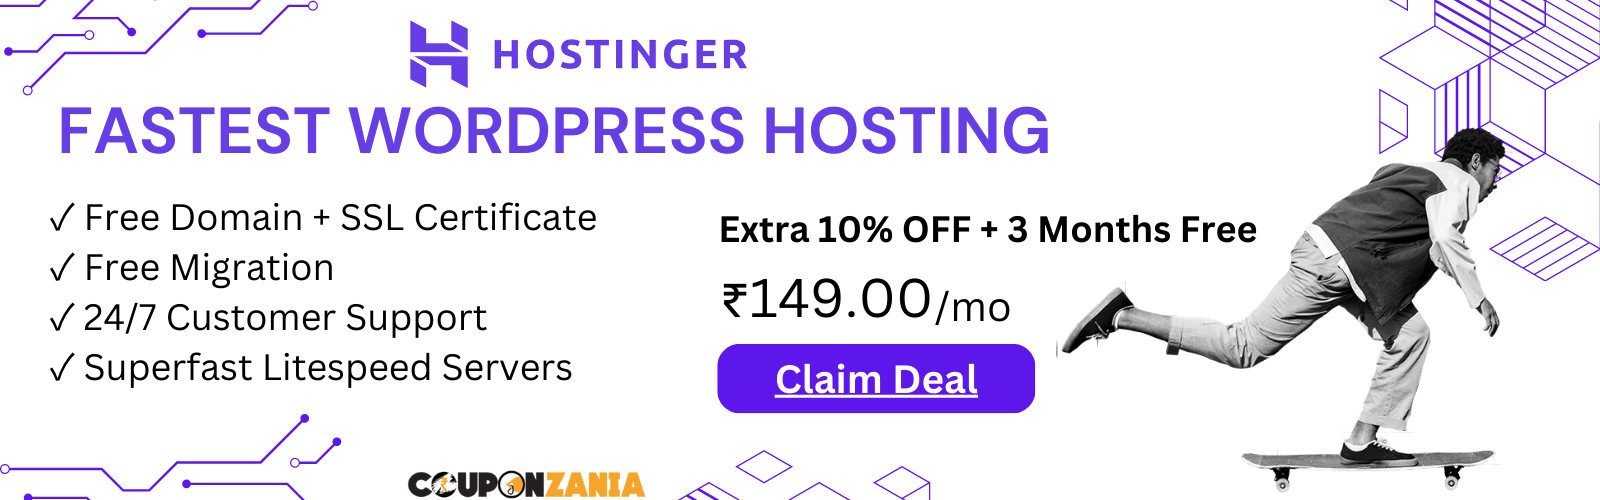 hostinger Coupons India